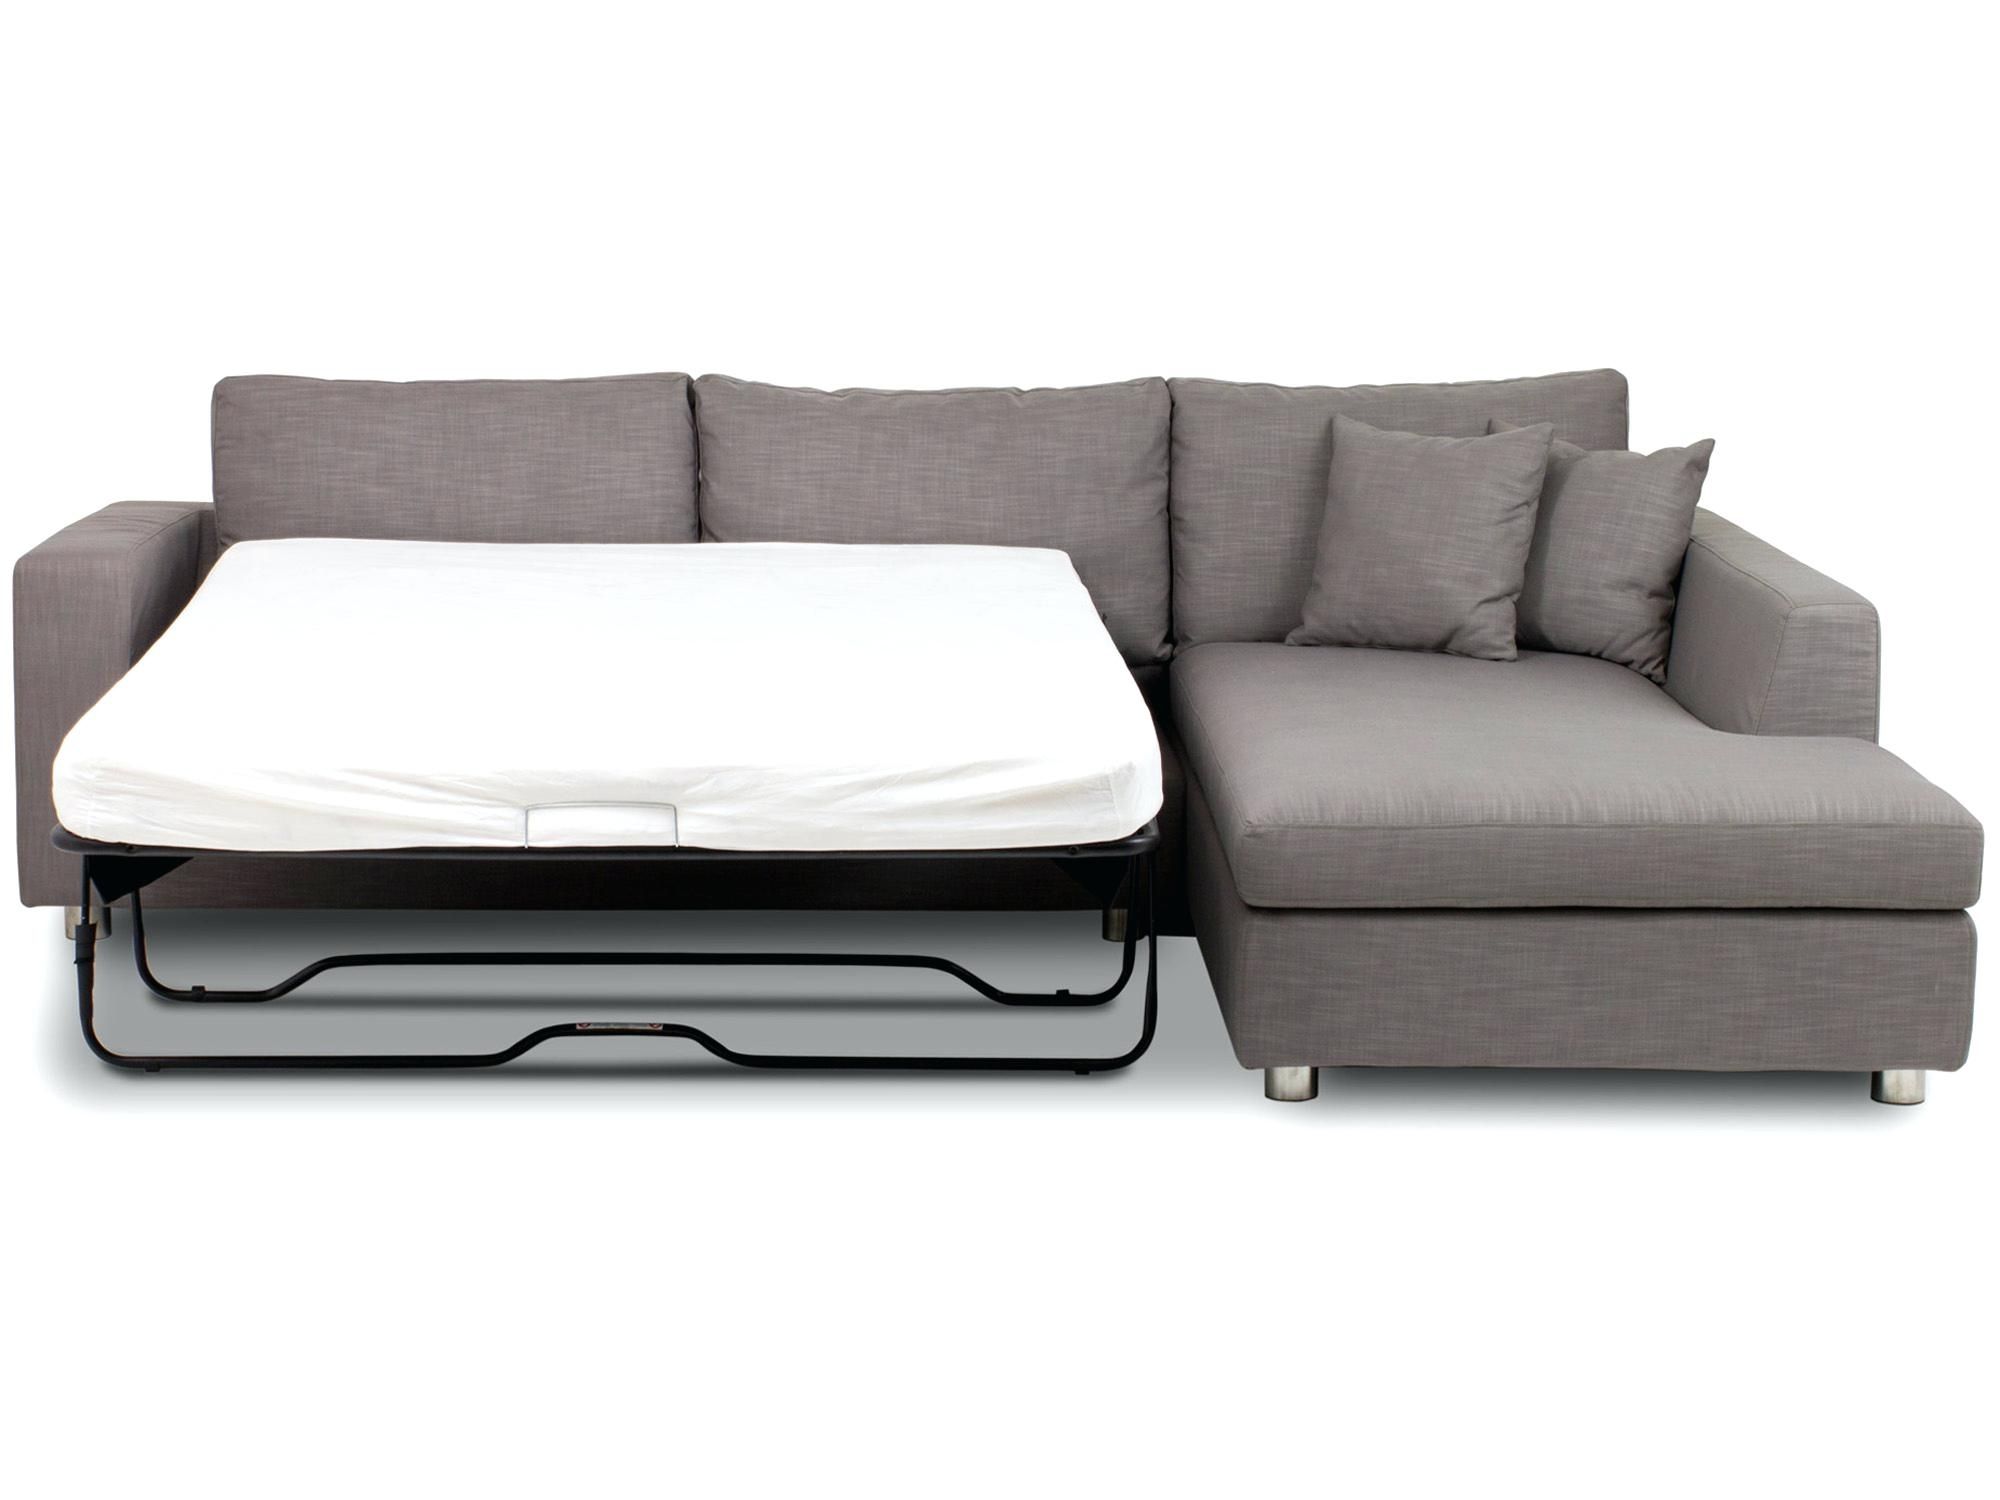 sofa chaise and double bed in one